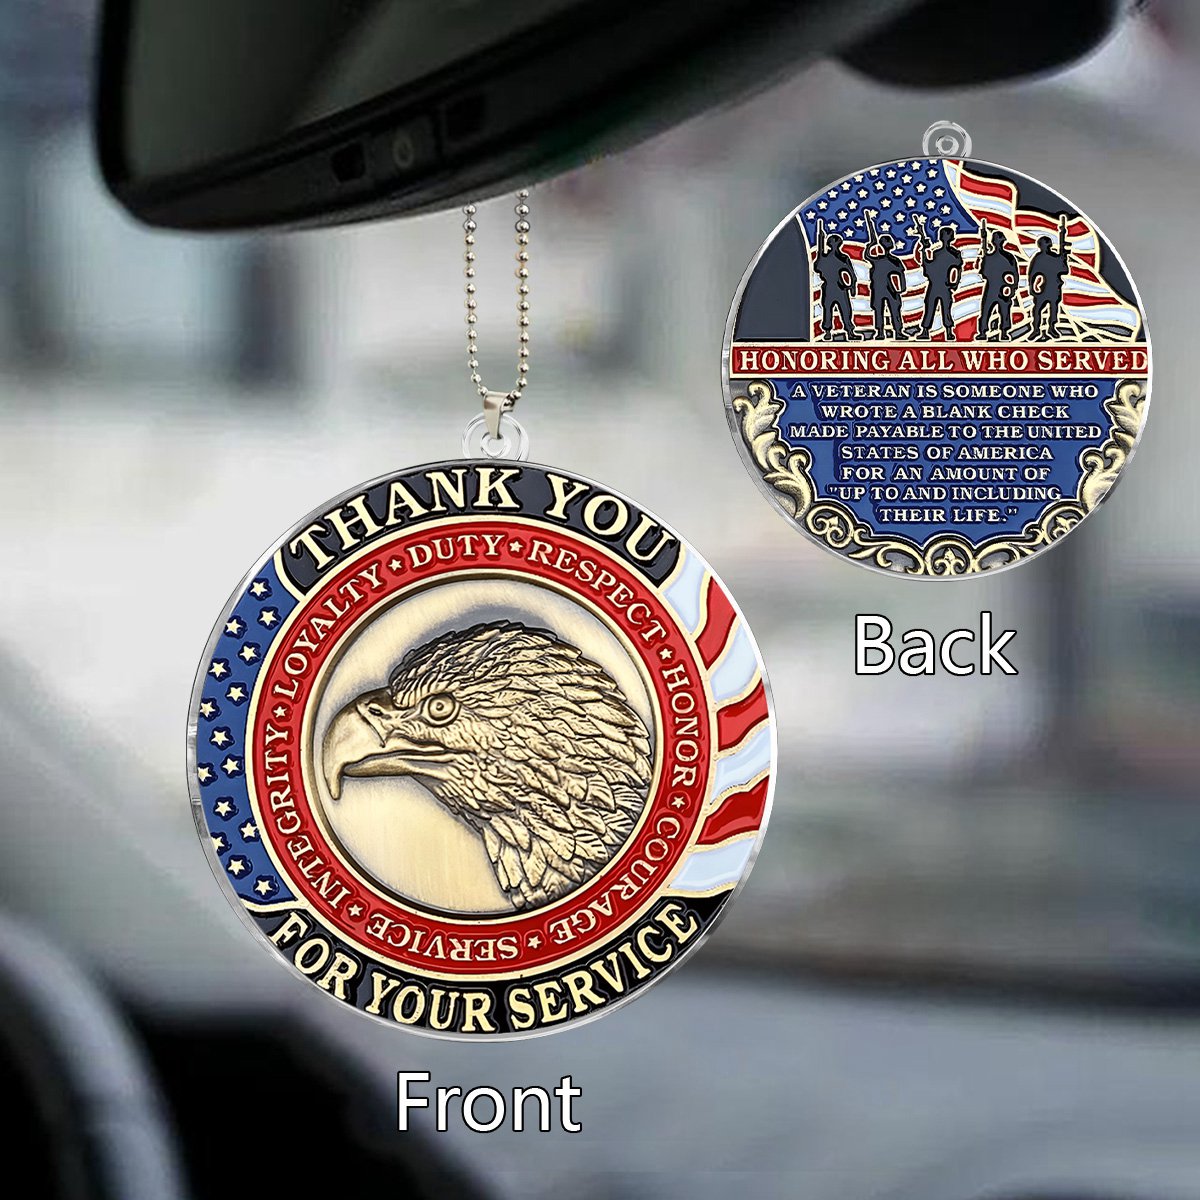 Say Thank You Who Have Service Country - Acrylic Car Ornament